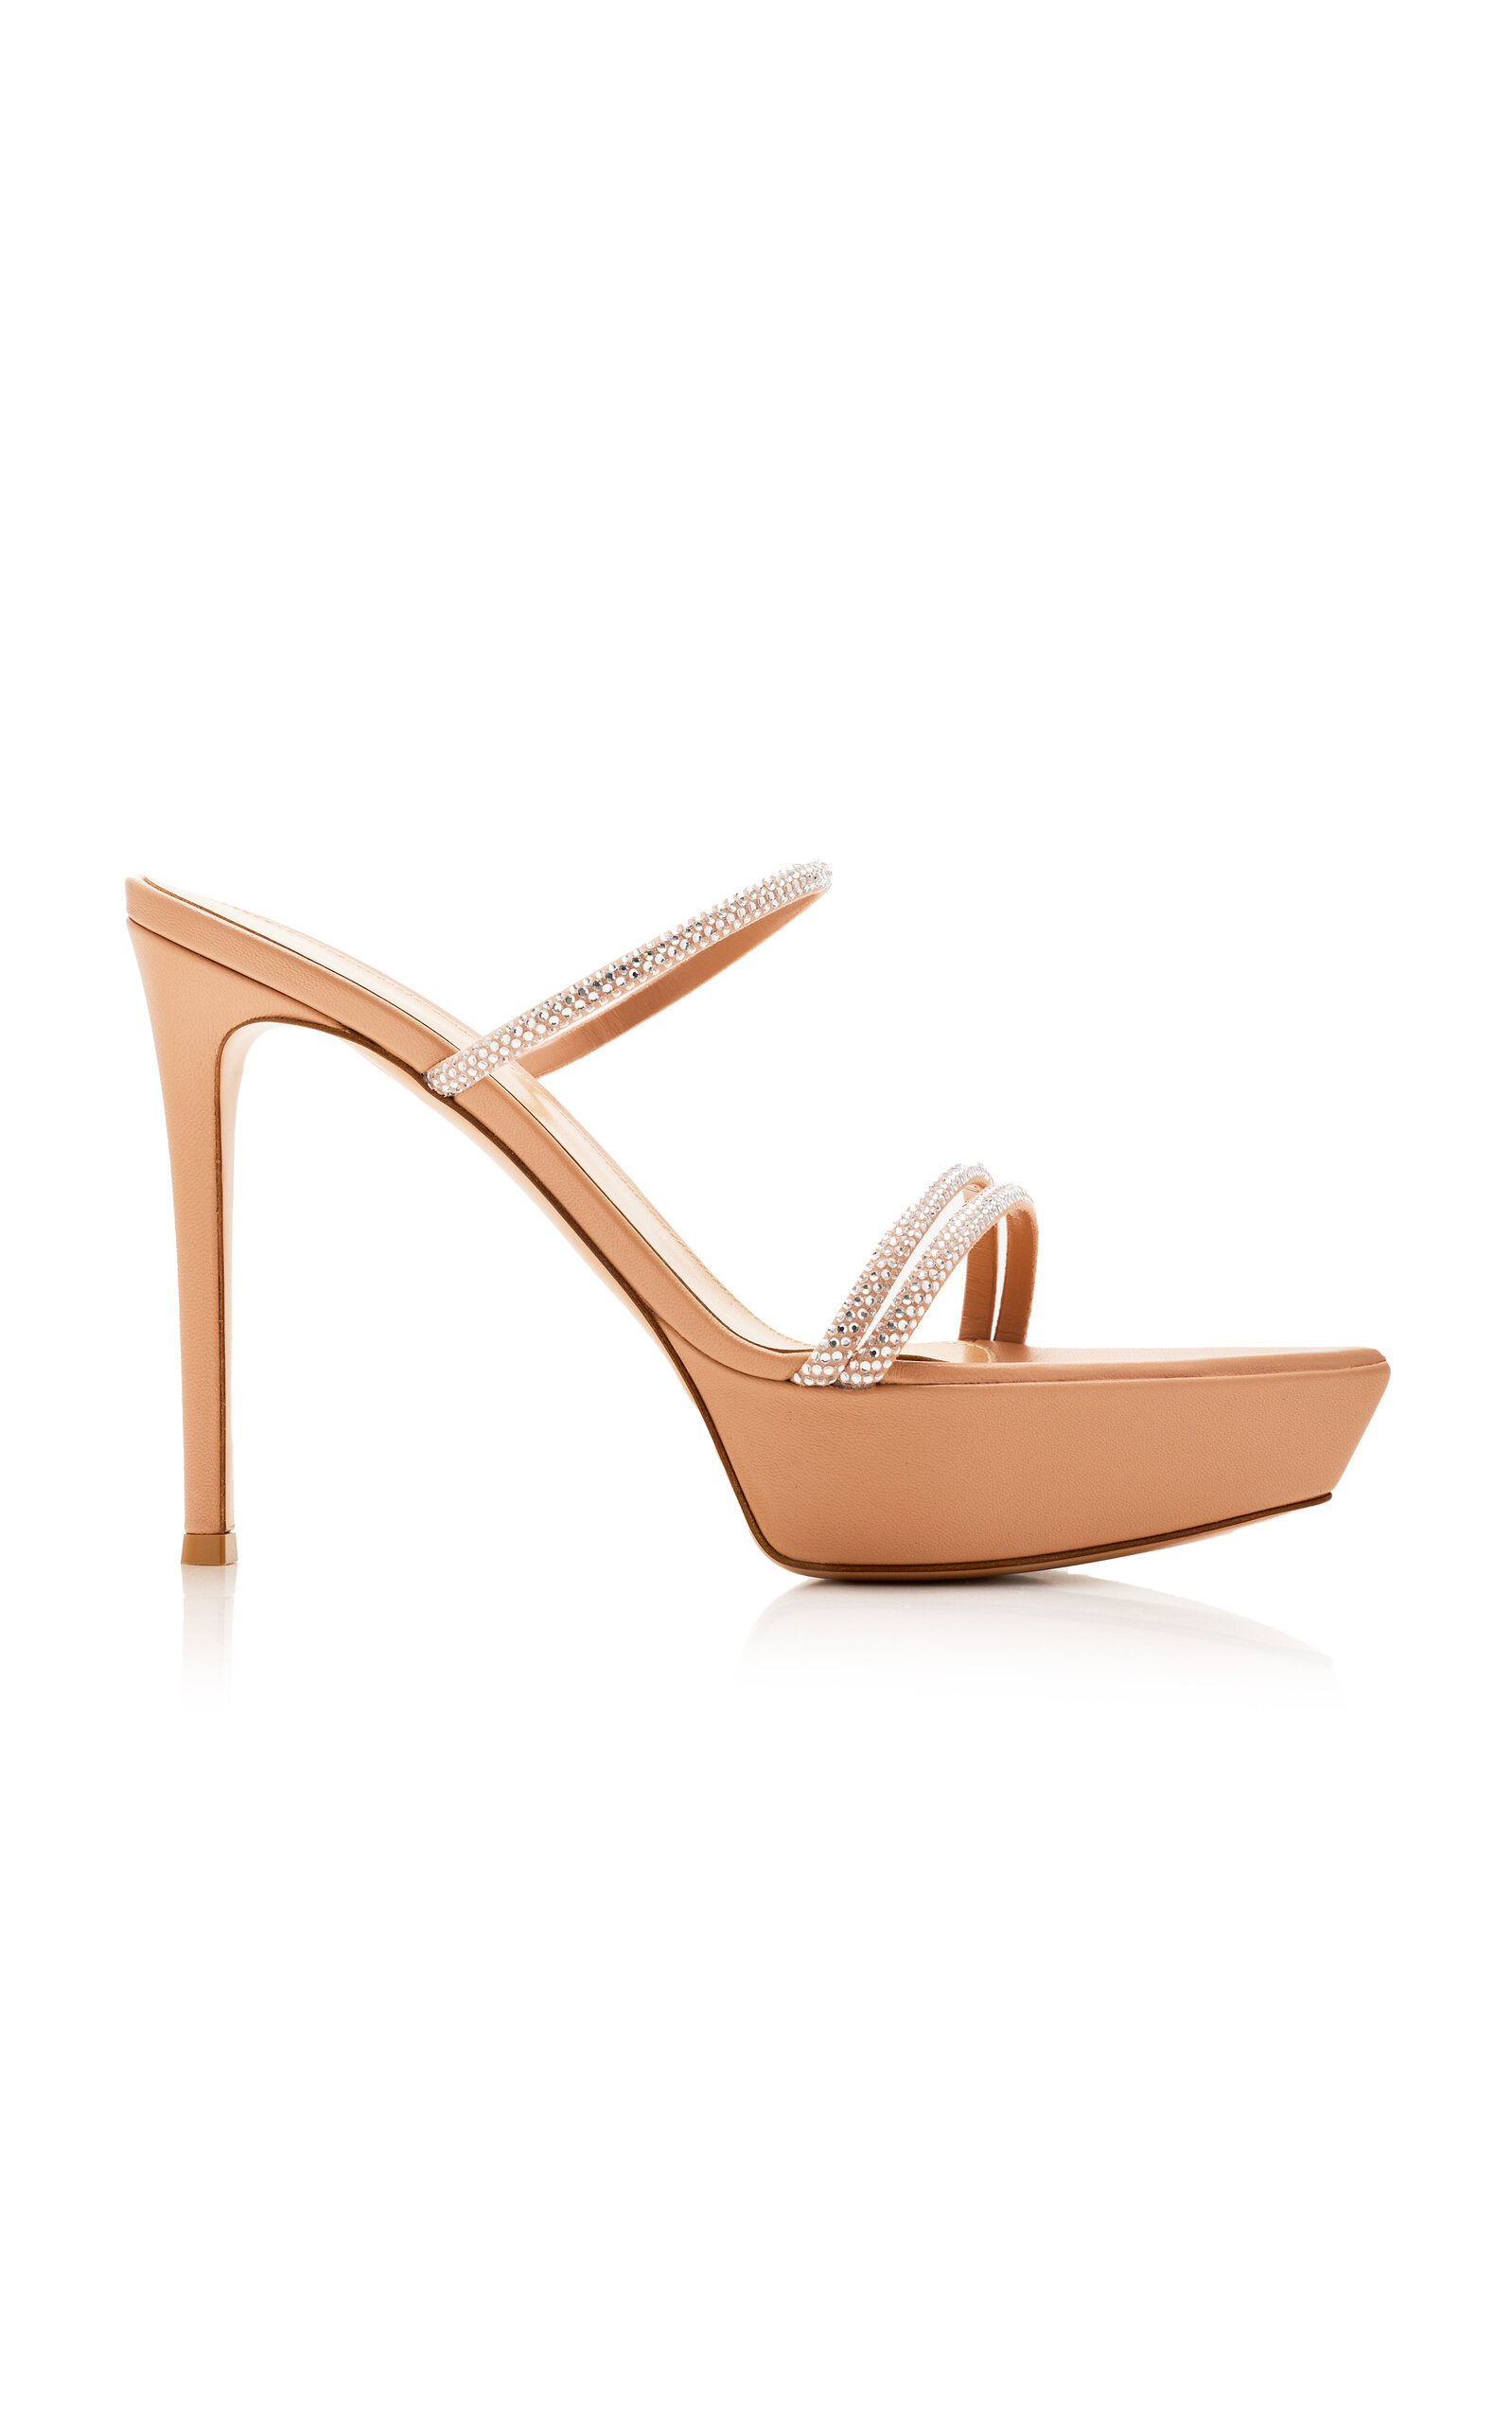 Gianvito Rossi Cannes Leather Platform Sandals In Neutral